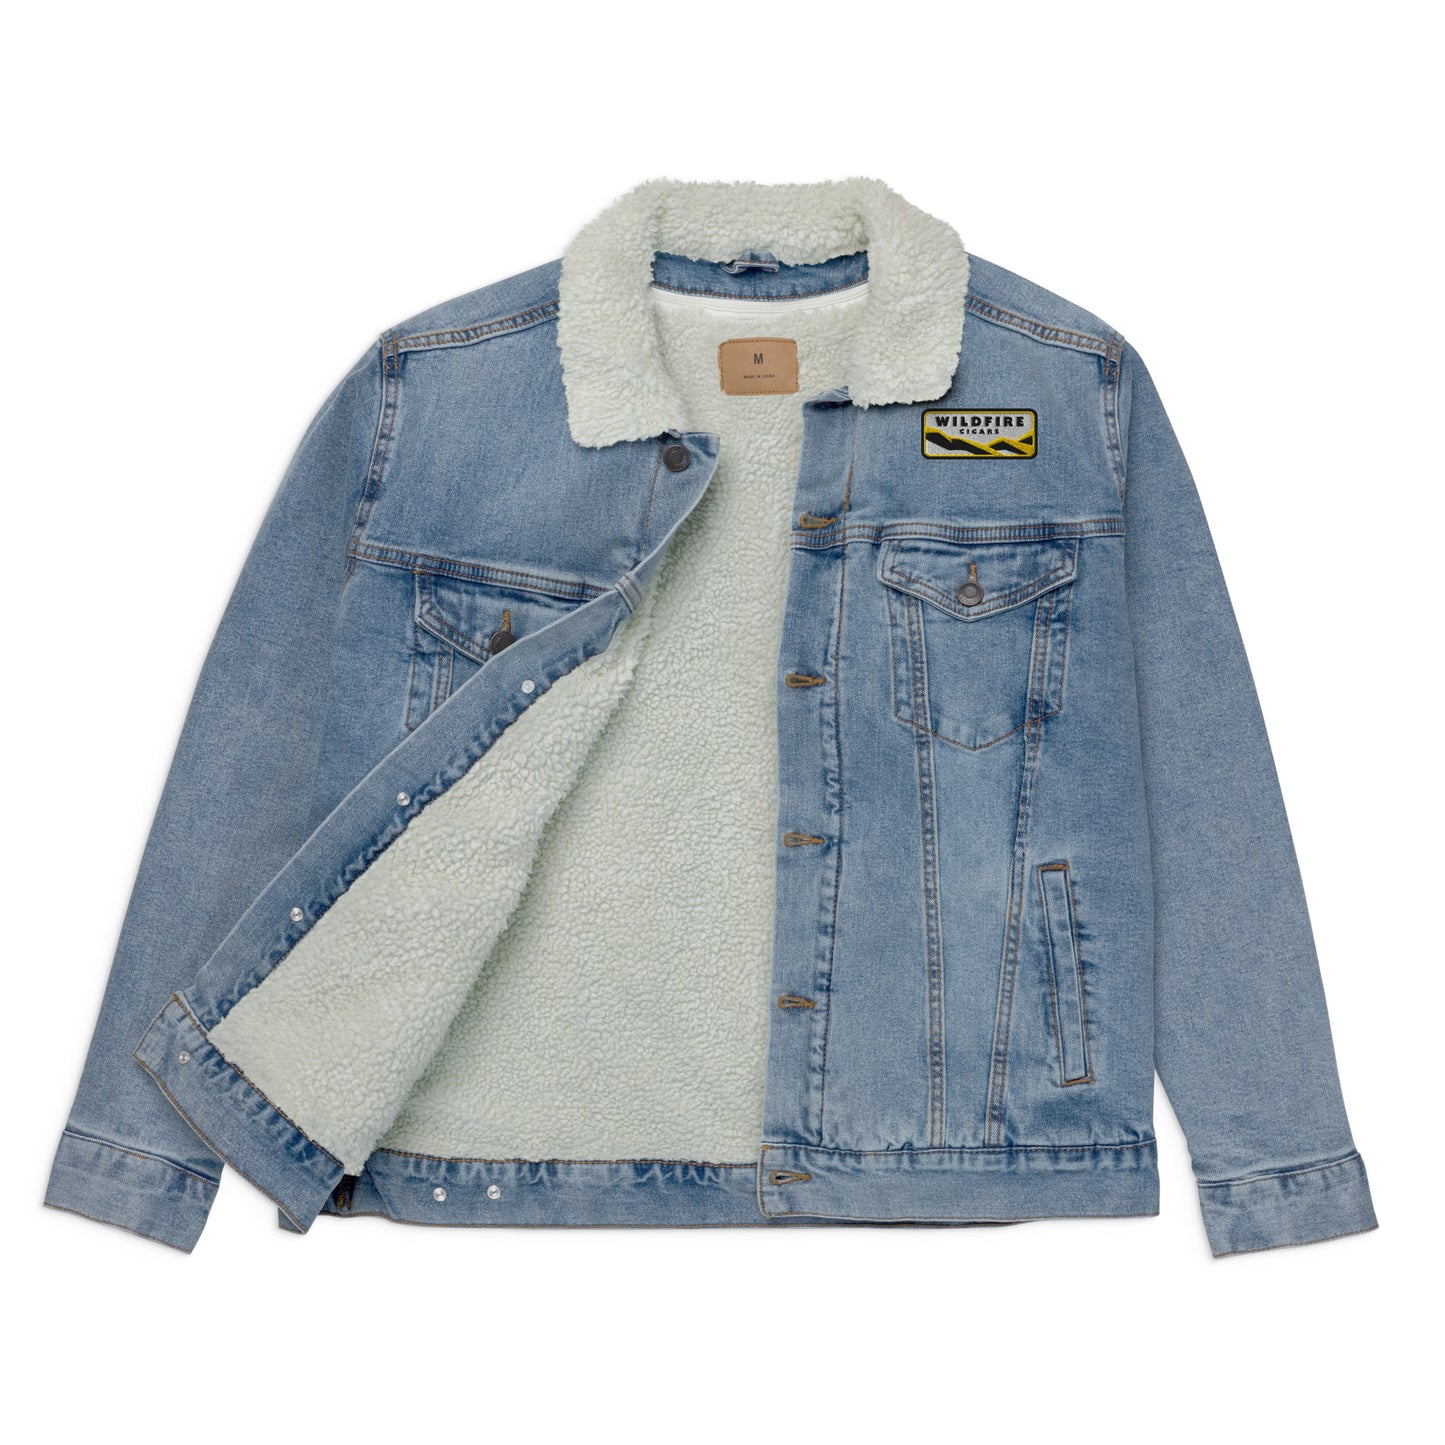 Wildfire Cigars embroidered denim sherpa jacket facing the front